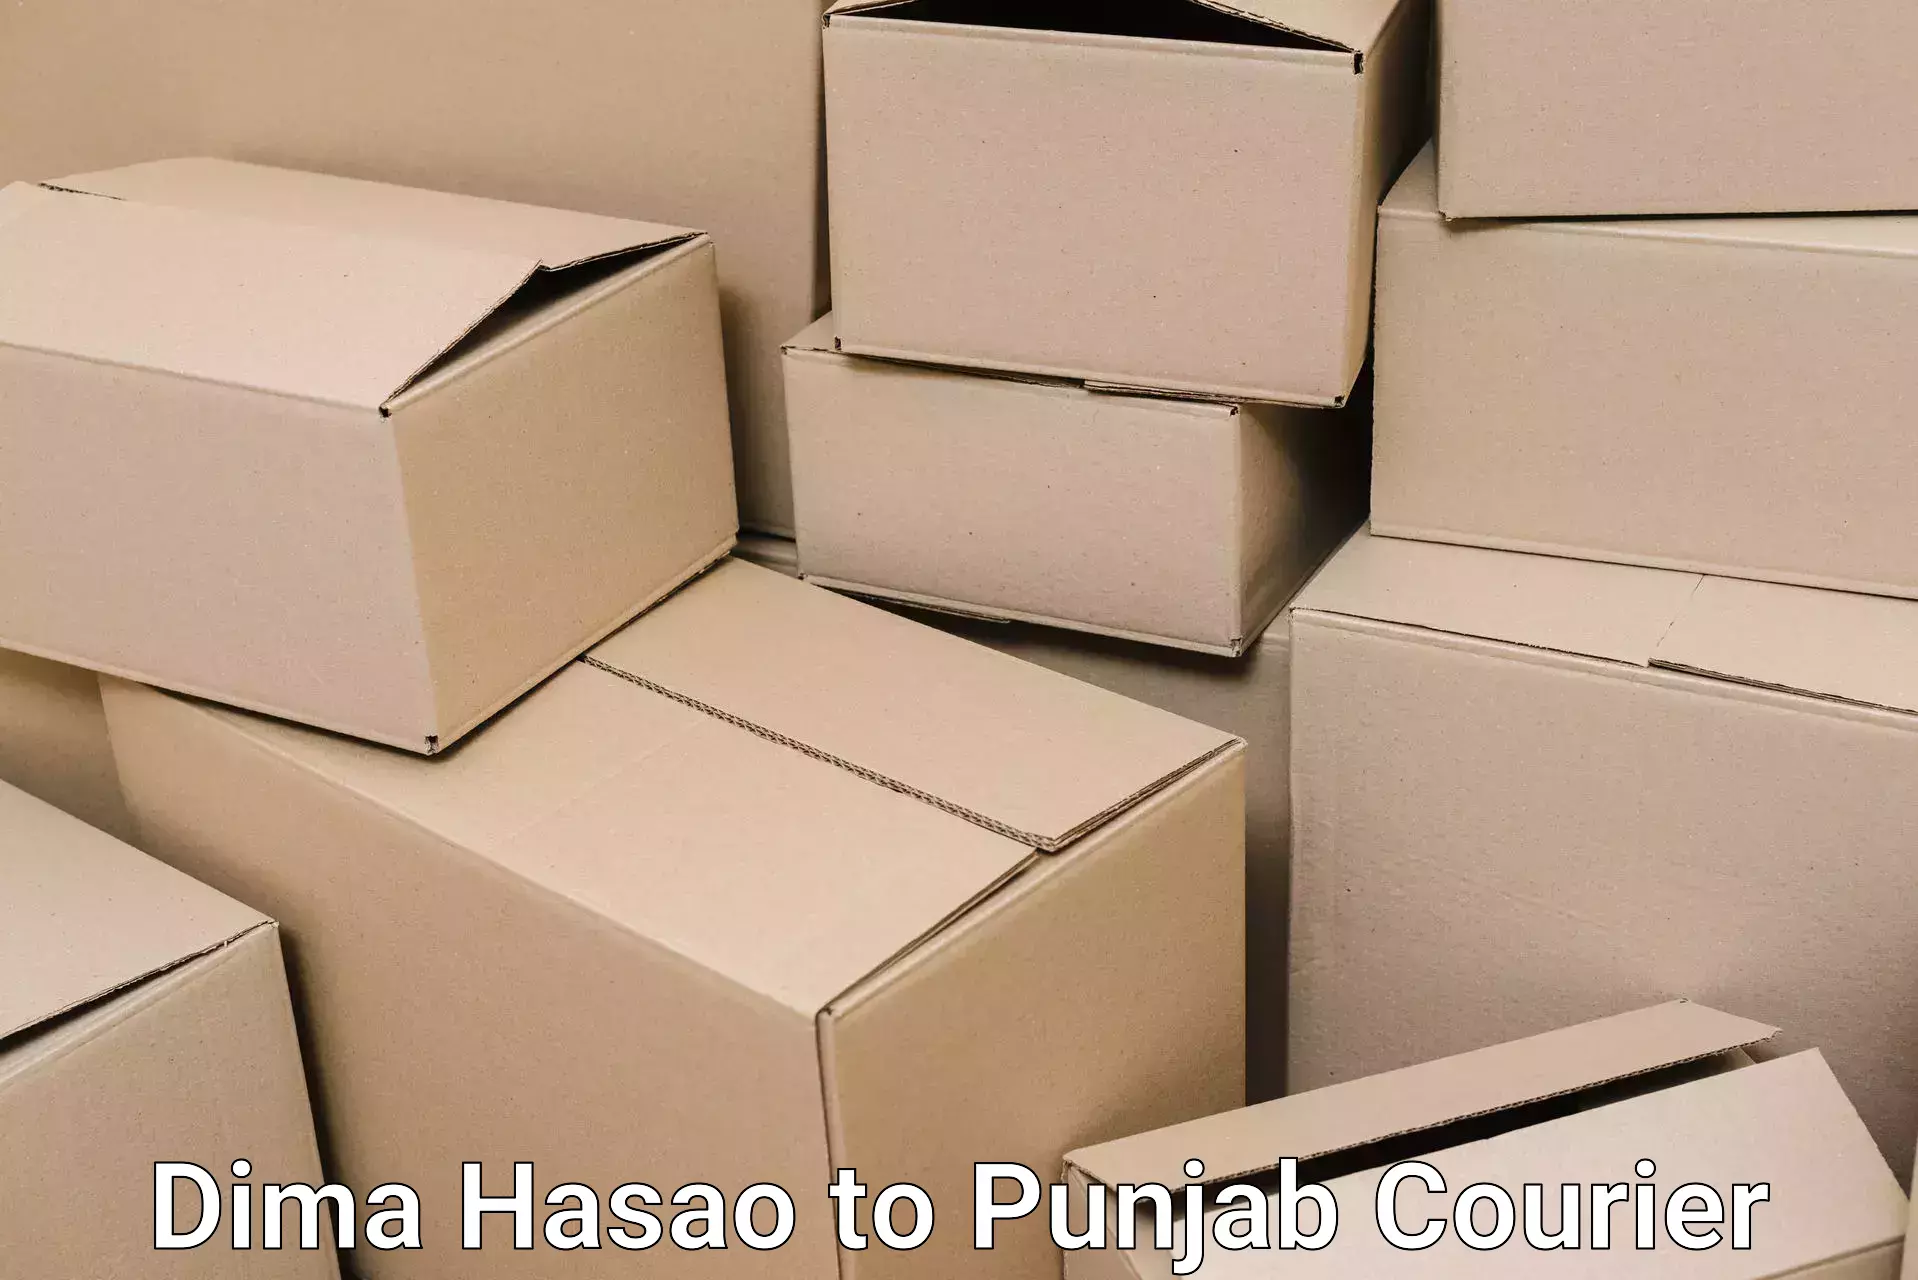 Efficient relocation services Dima Hasao to Punjab